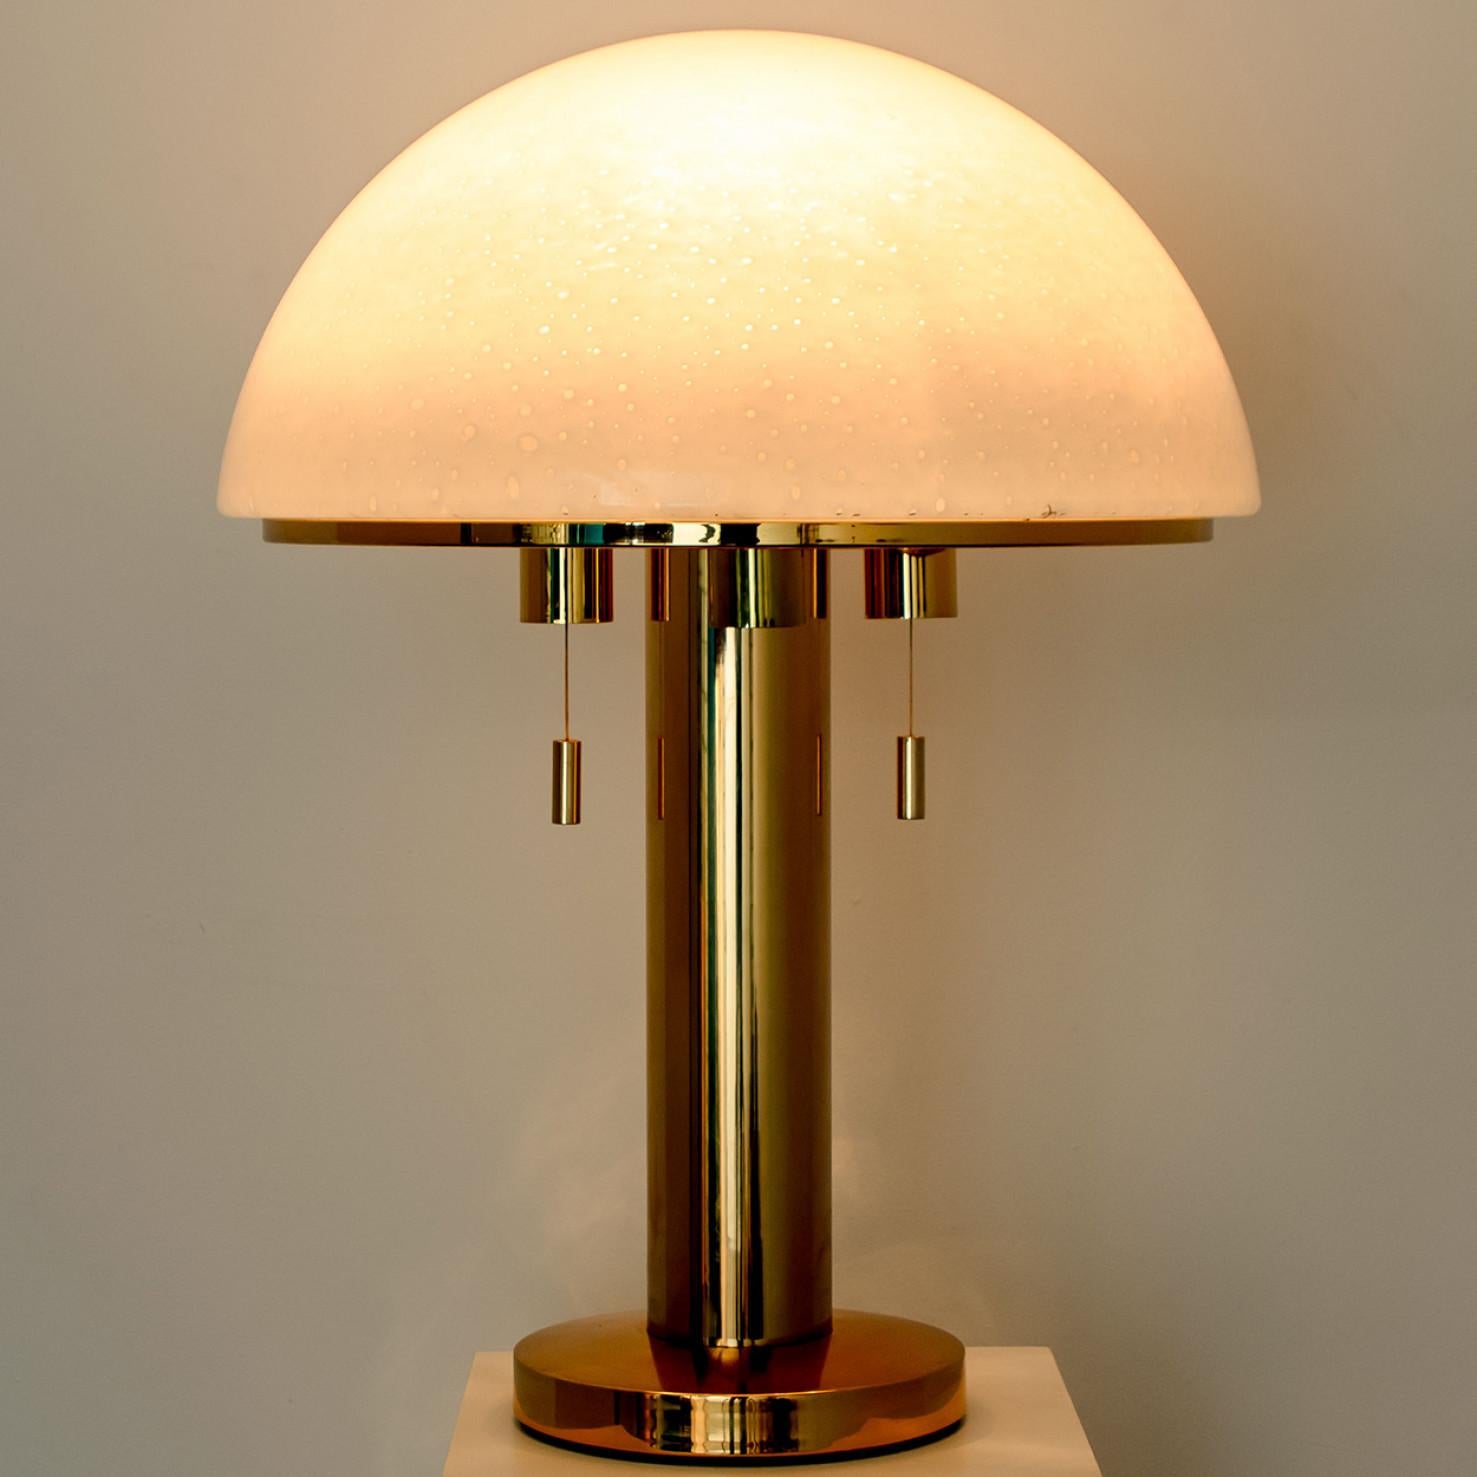 Mushroom table lamp with white satin glass and a brass base. Designed and manufactured by Limburg Glashütte, Germany in 1970.
The lamp has the organic shape of a mushroom. It is in perfect condition, great design from the 70's.

Dimensions:
Height: